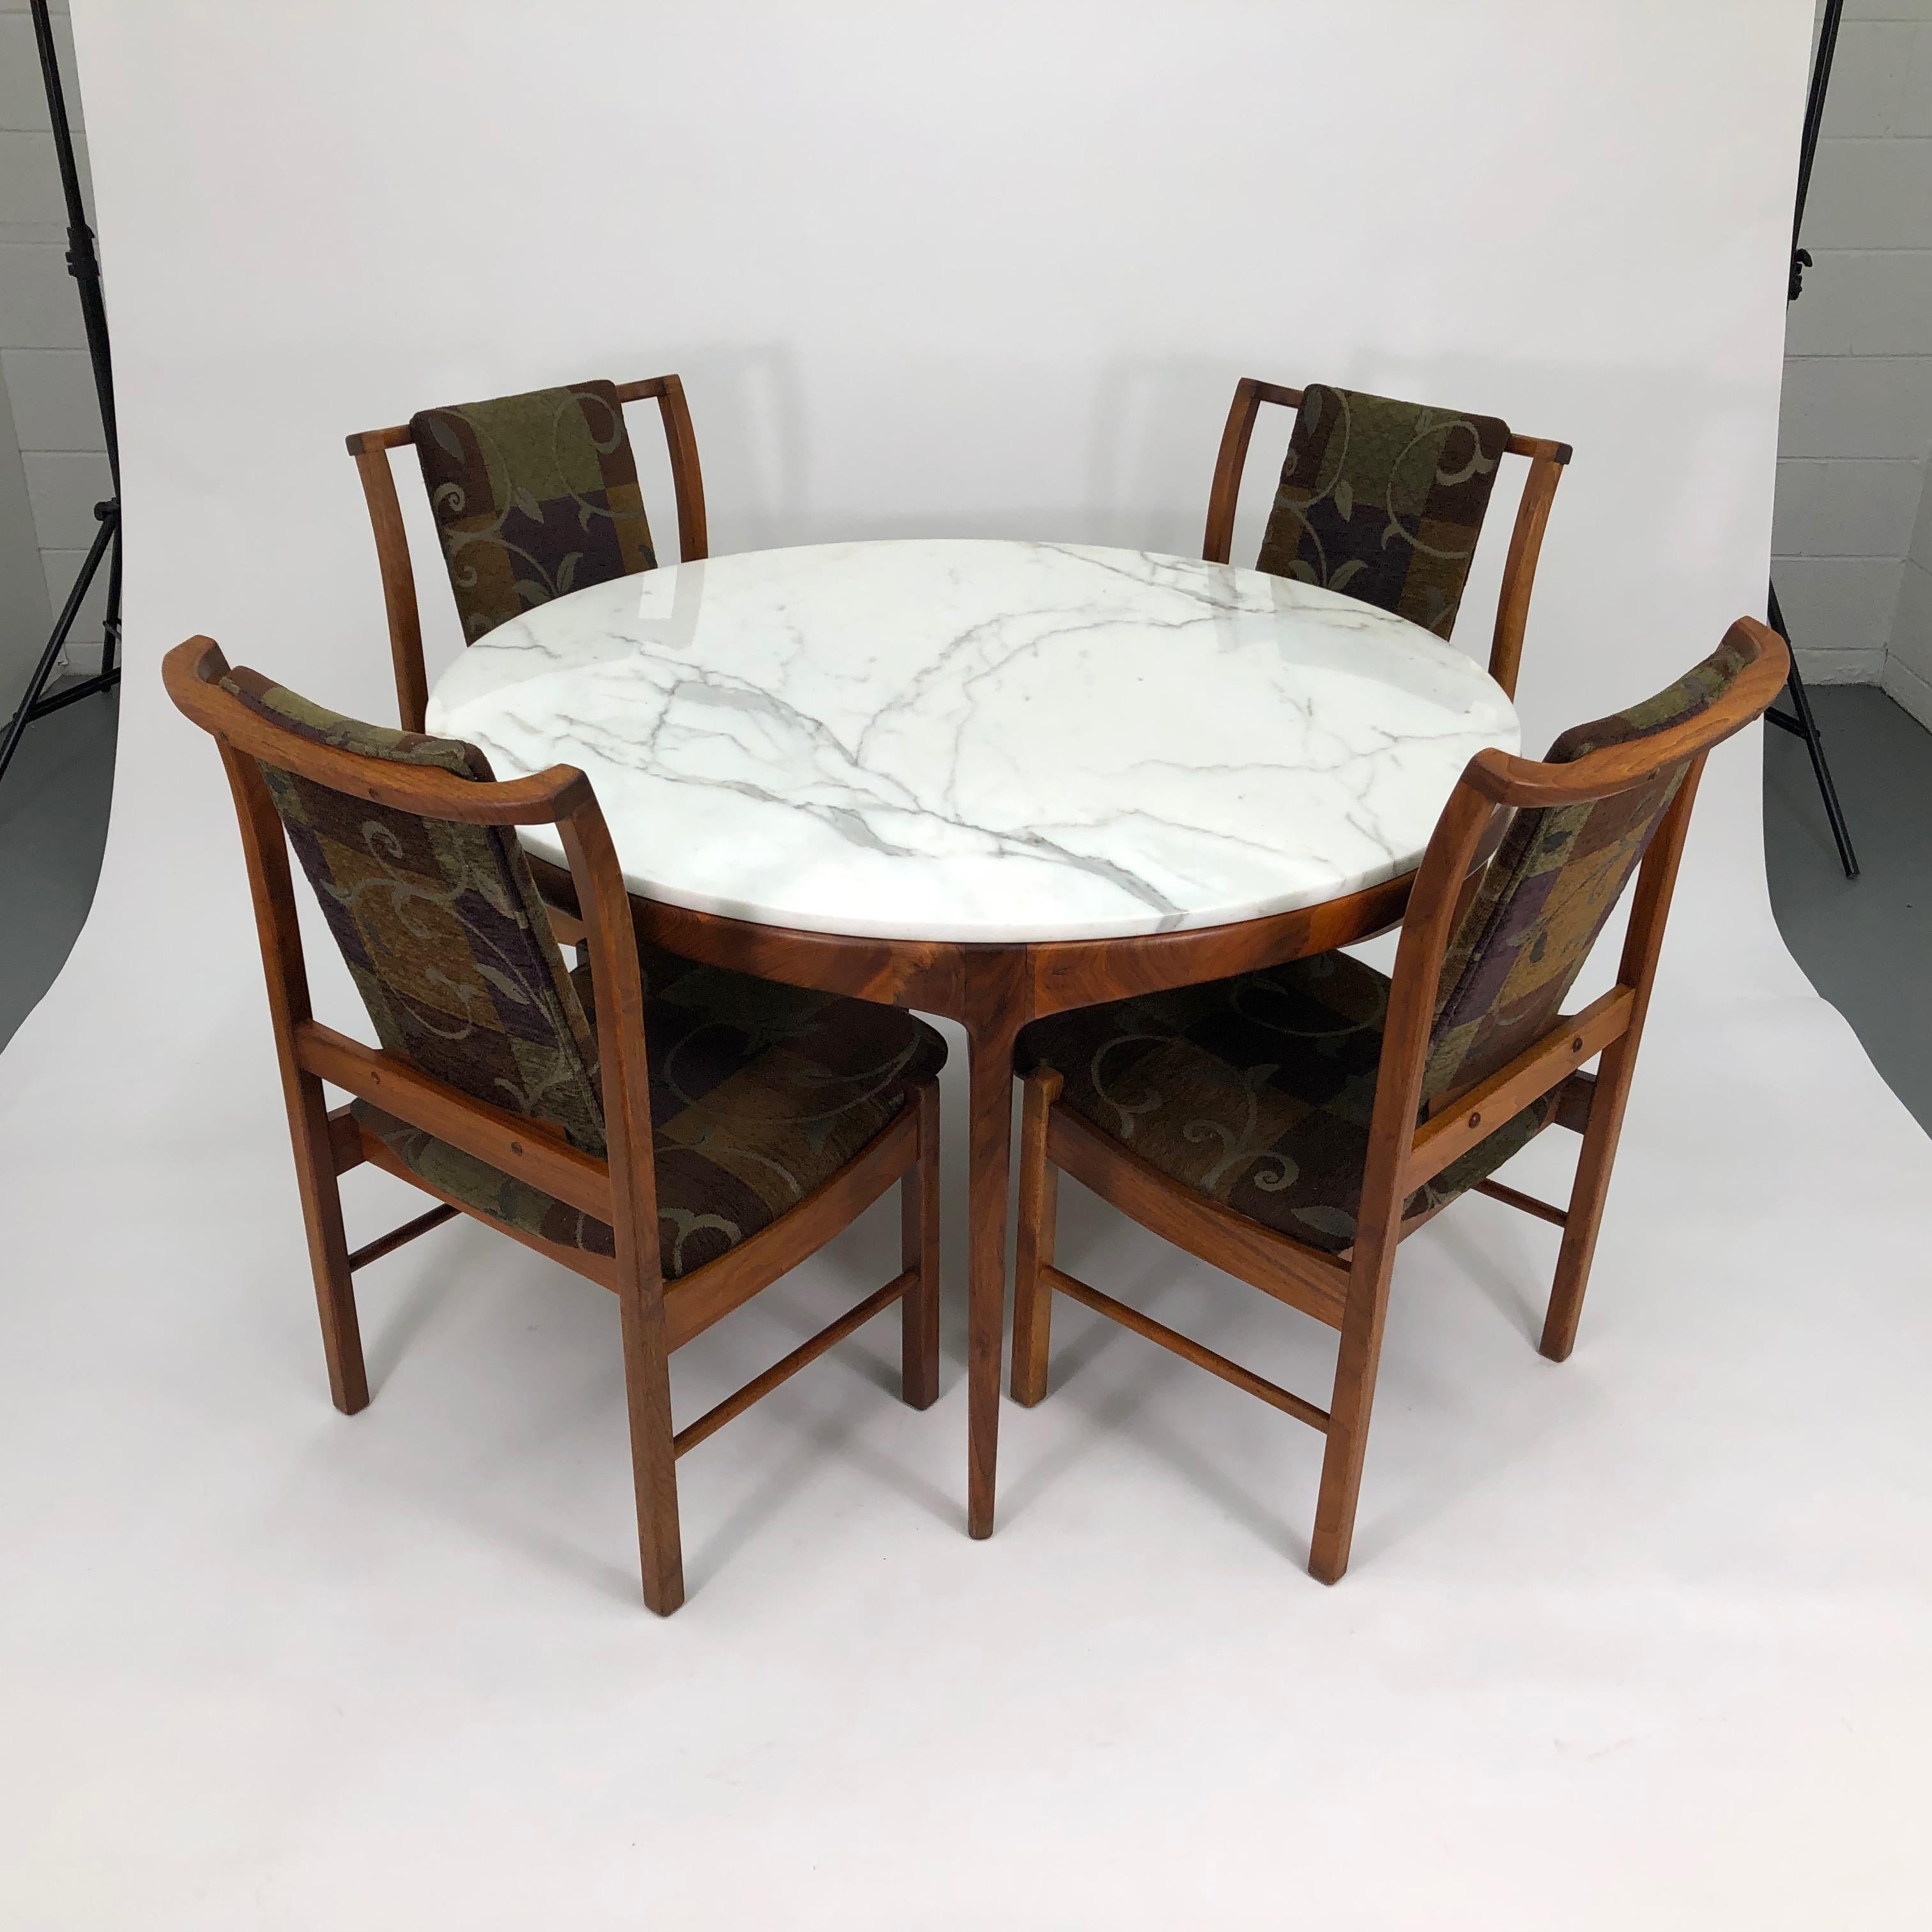 A rare Carrara marble and walnut dining table and chairs for Lane's 'Rhythm' series. 

Custom ordered for the sole previous owner by the Denver Design Center in the mid-1960s.

This beautiful edition is perfectly made for intimate dinners - or